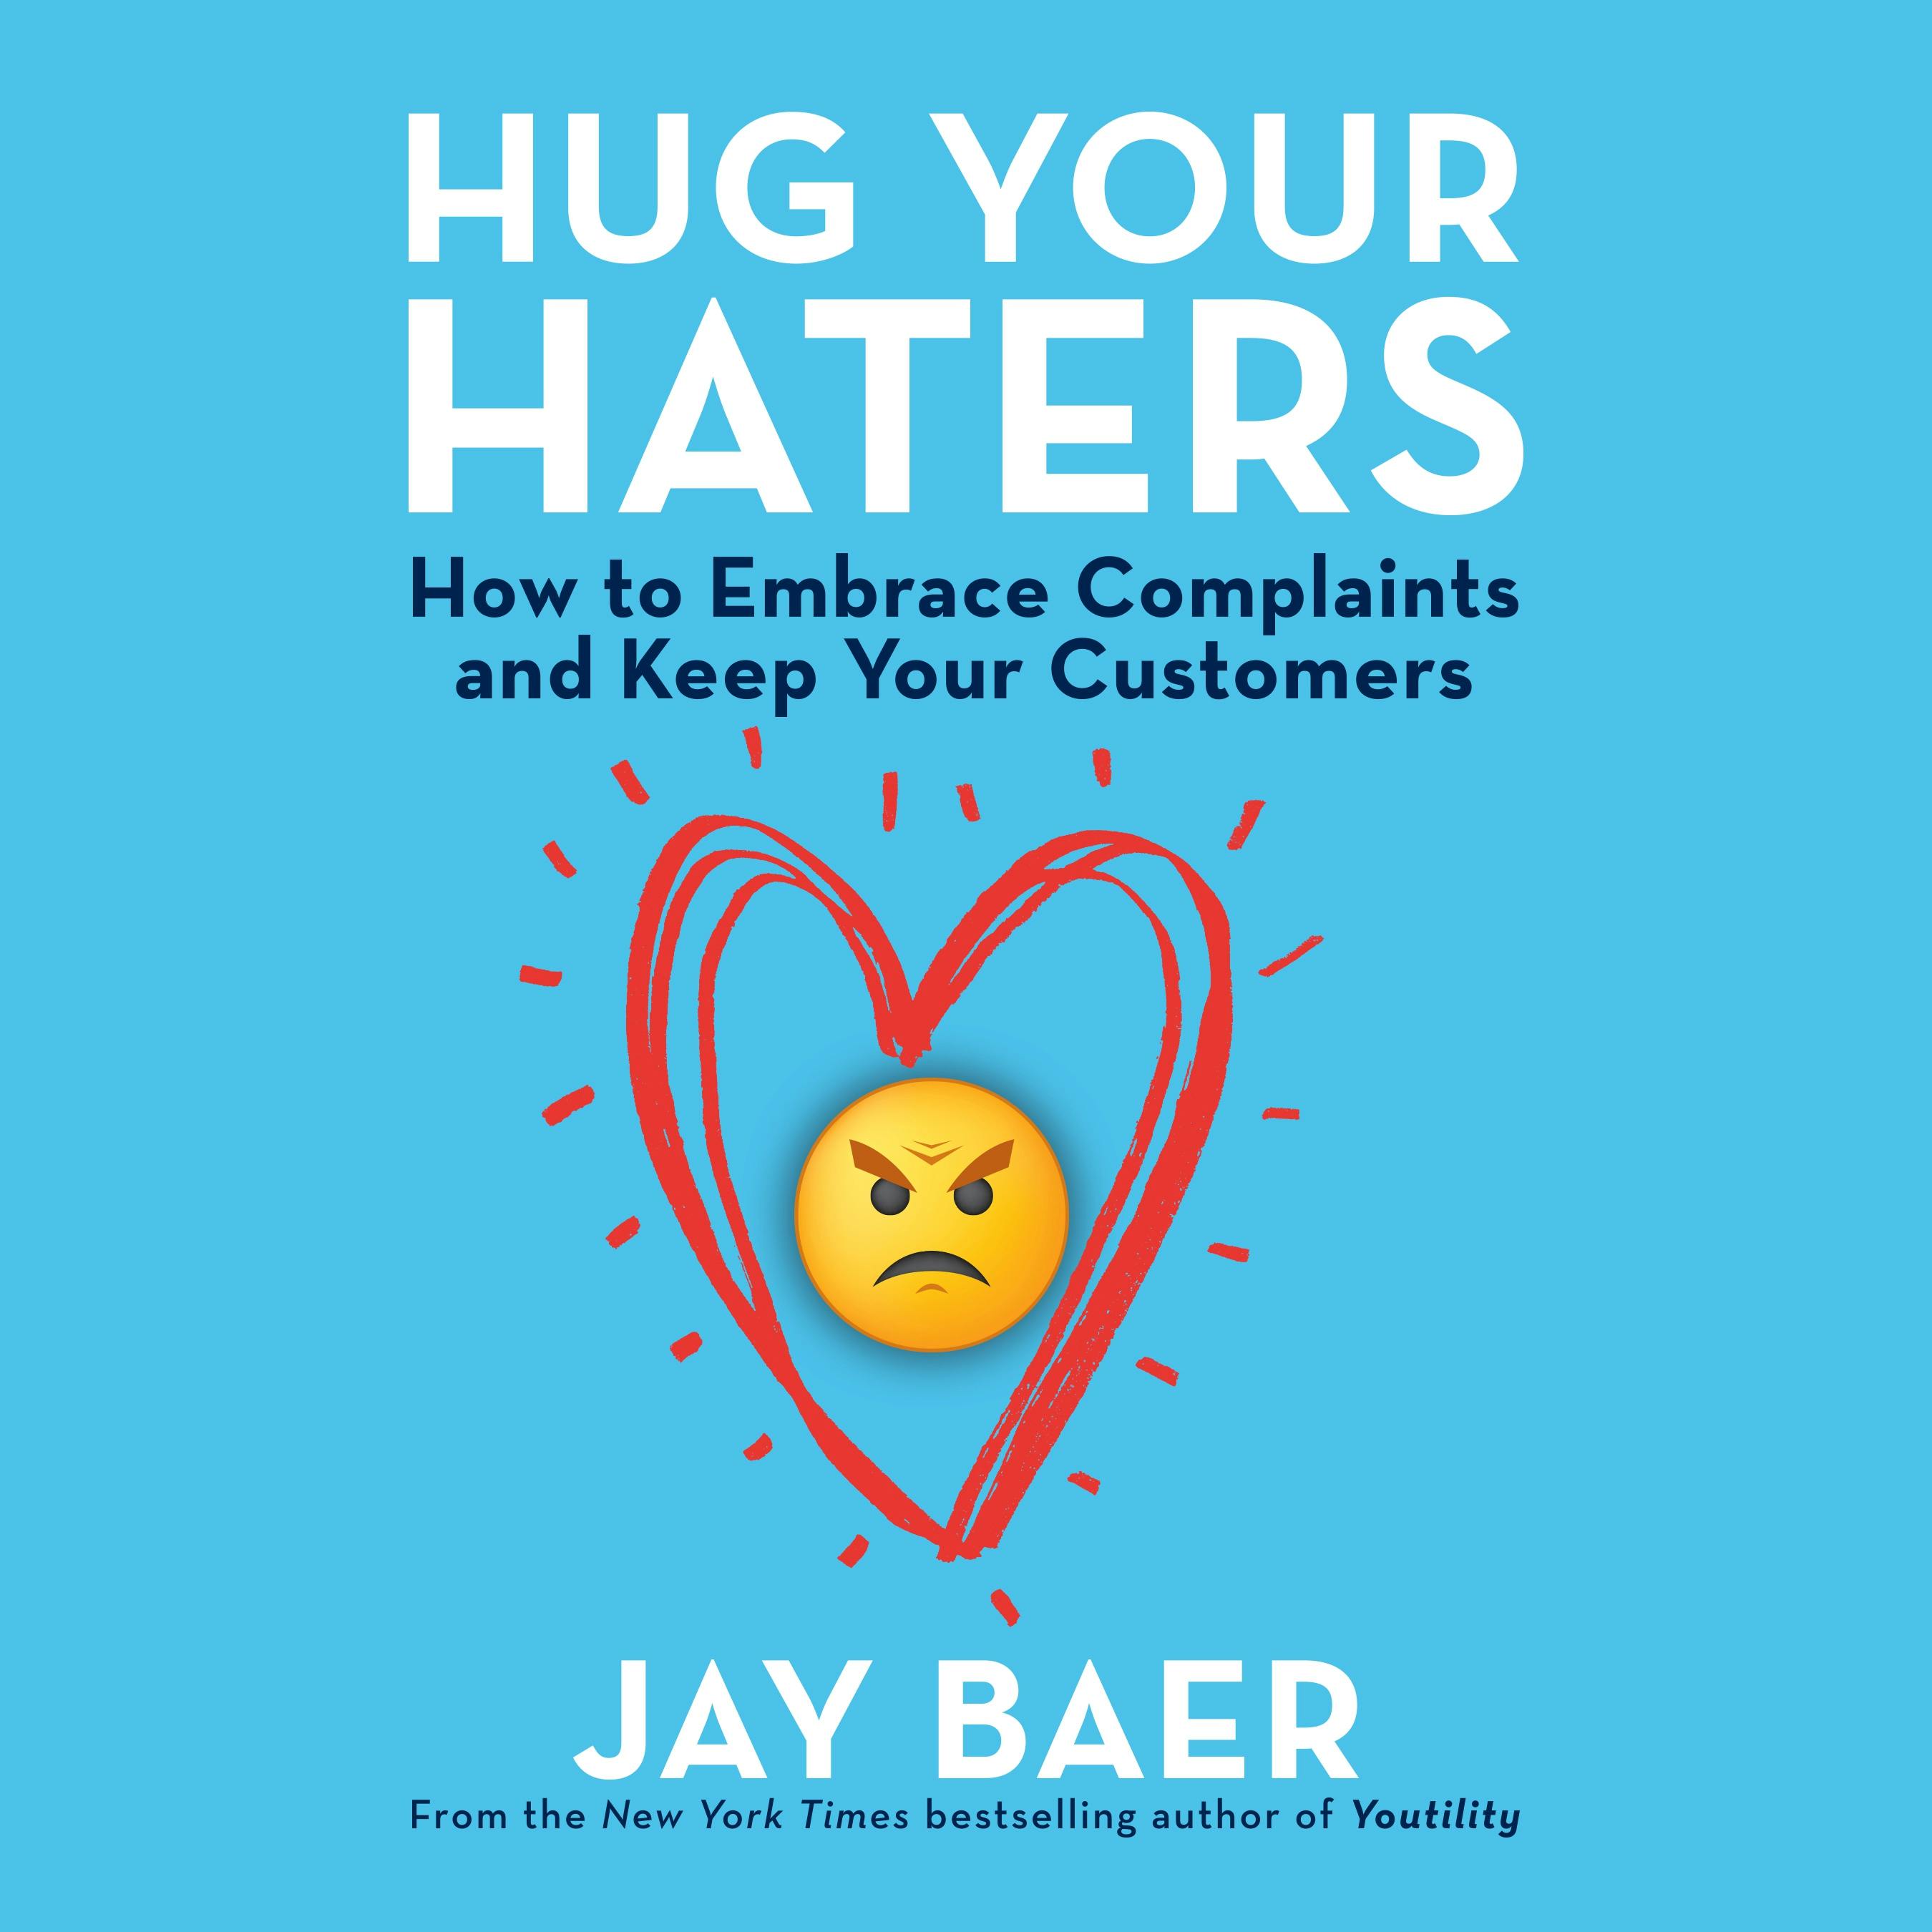 Hug Your Haters: How to Embrace Complaints and Keep Your Customers - Jay Baer